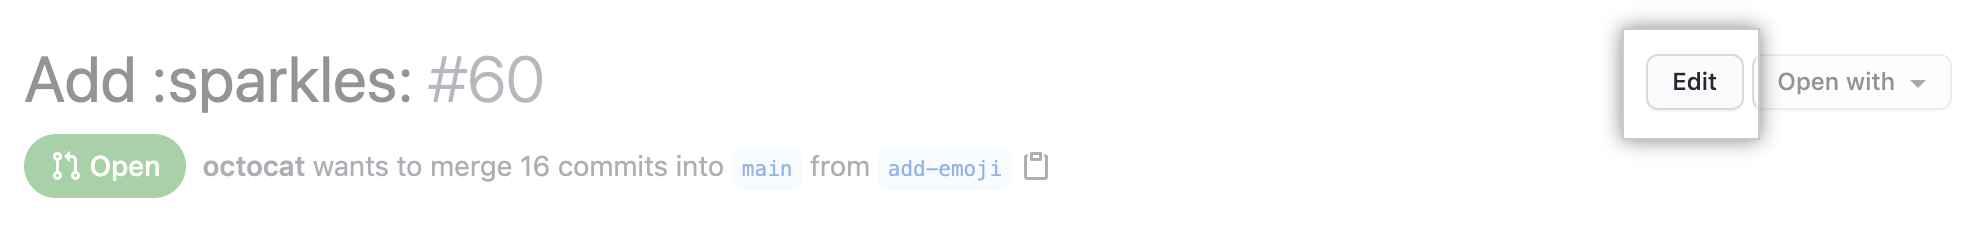 Pull Request edit button